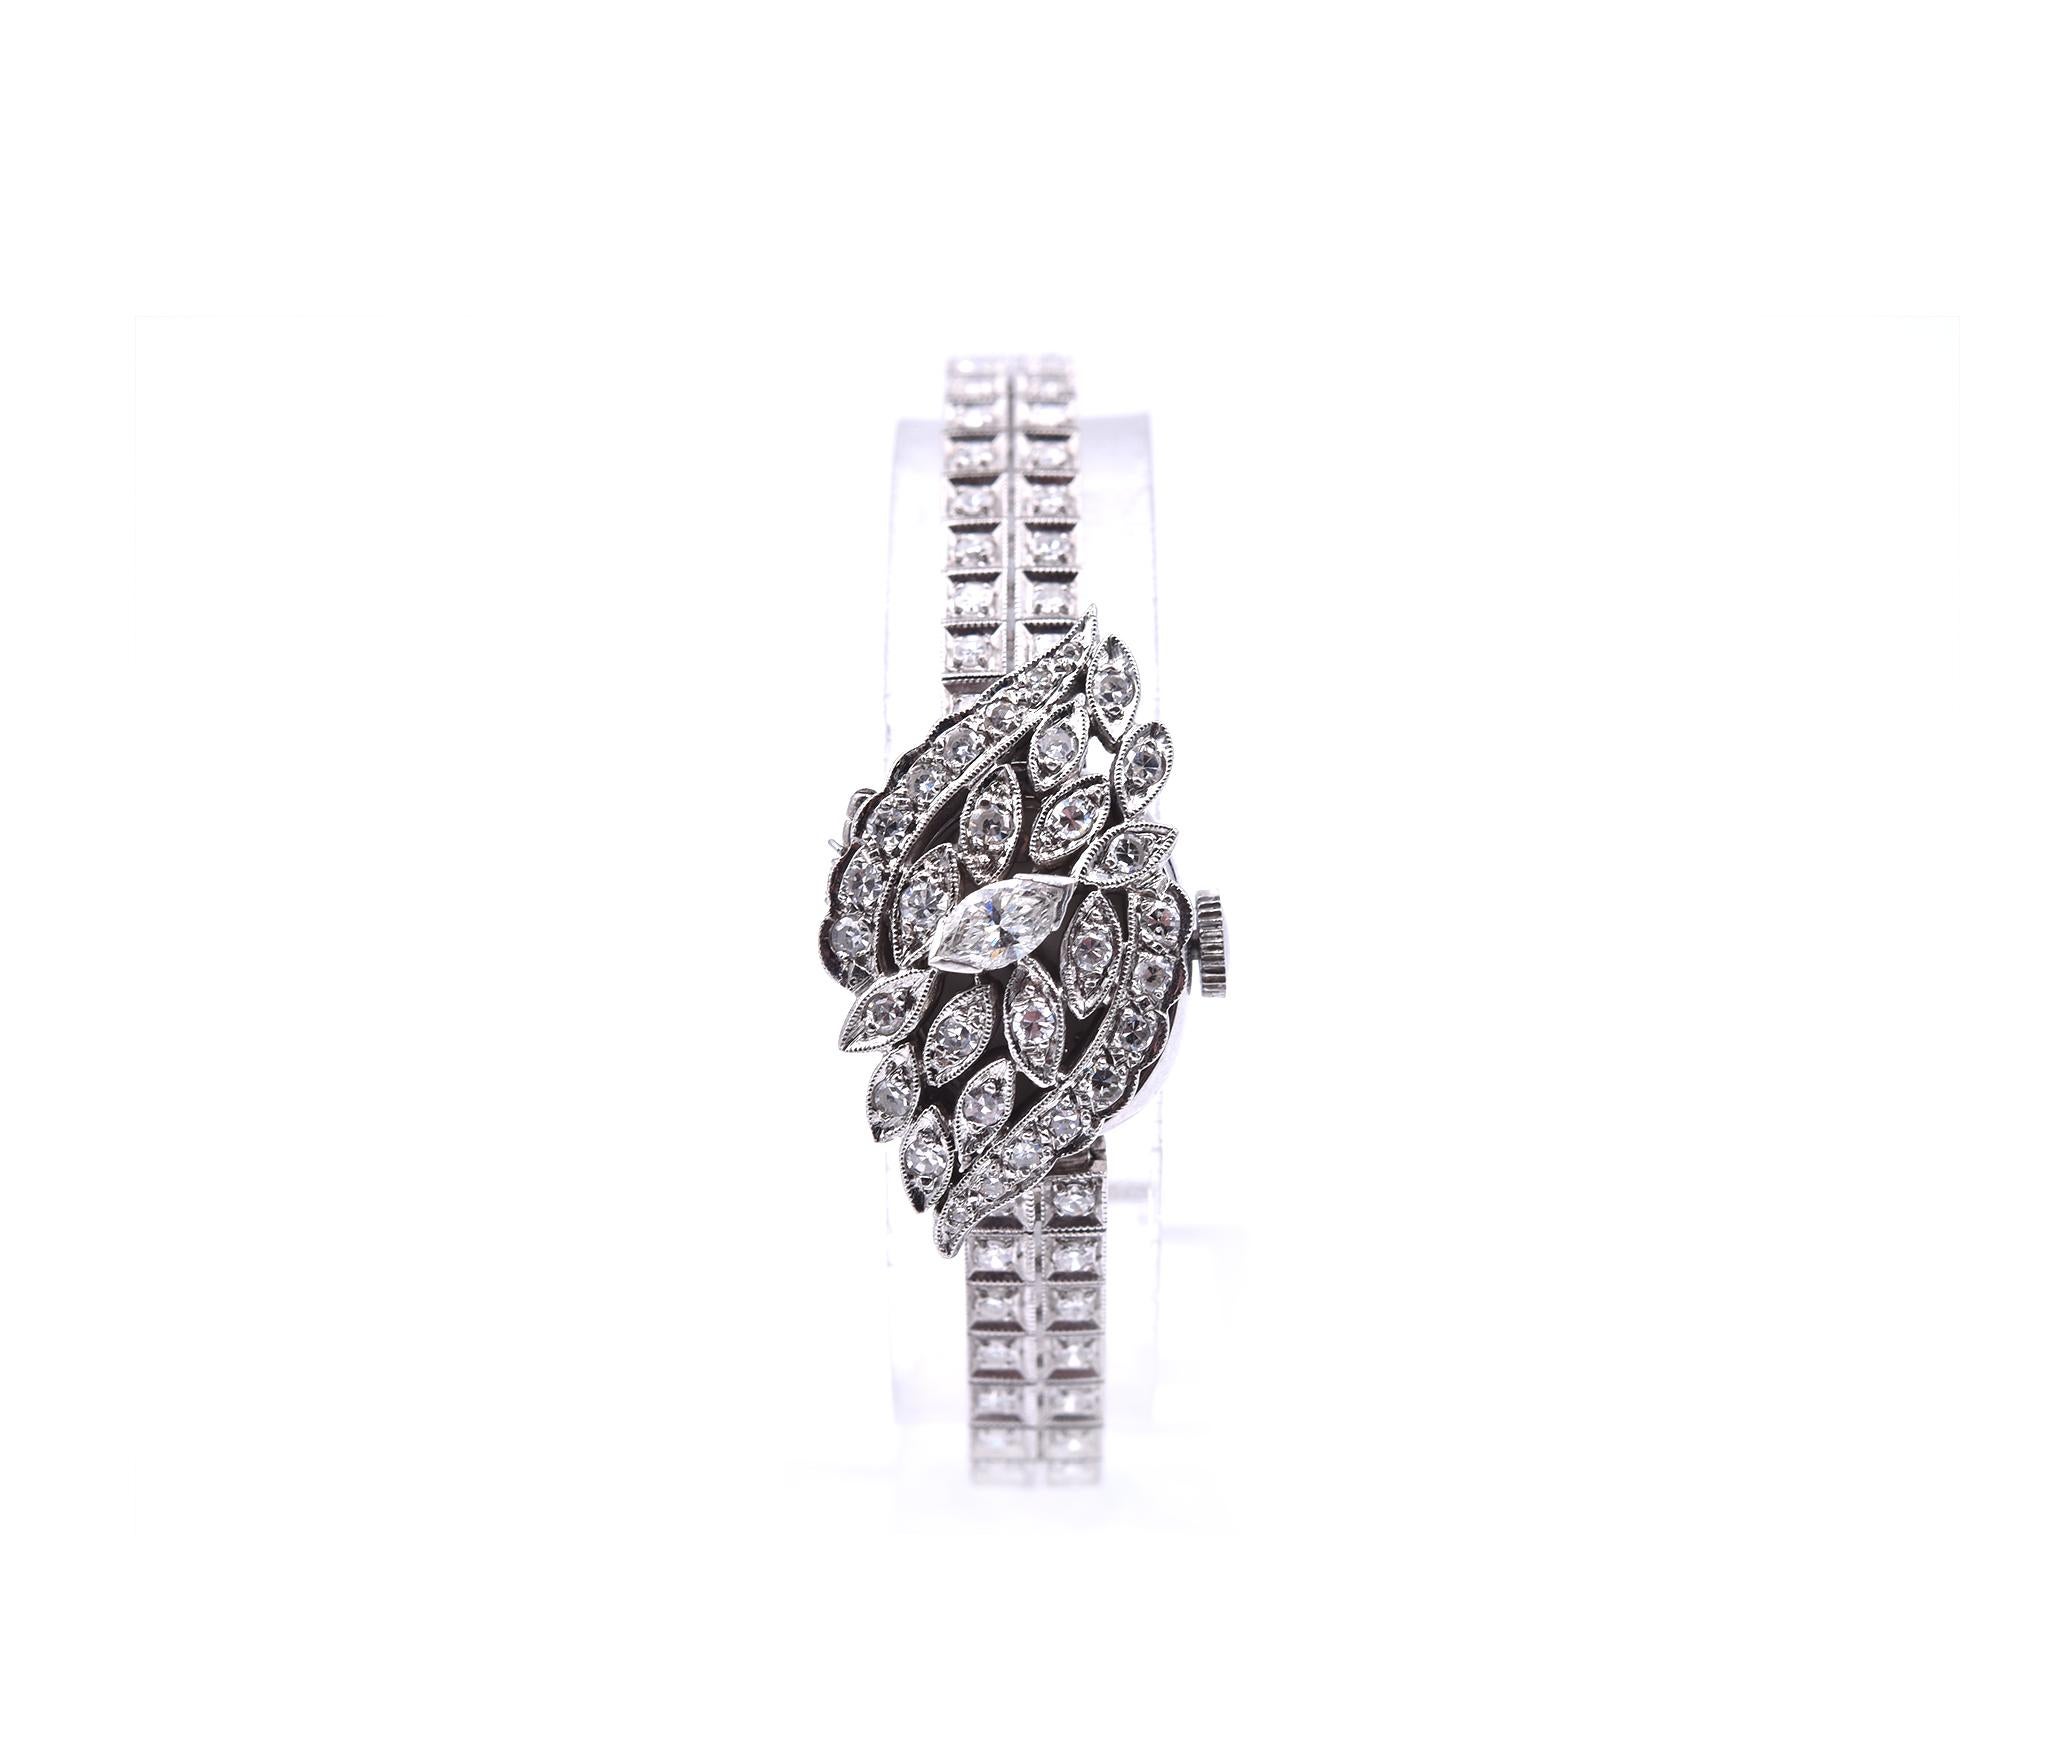 Movement: manual wind movement
Function: hours, minutes
Diamonds: 3.18 carat total weight
Color: G-H
Clarity: VS
Case: round 18mm x 15.5mm 14k white gold case with plastic crystal, flip-top set with diamonds, solid-case back
Dial: white dial with